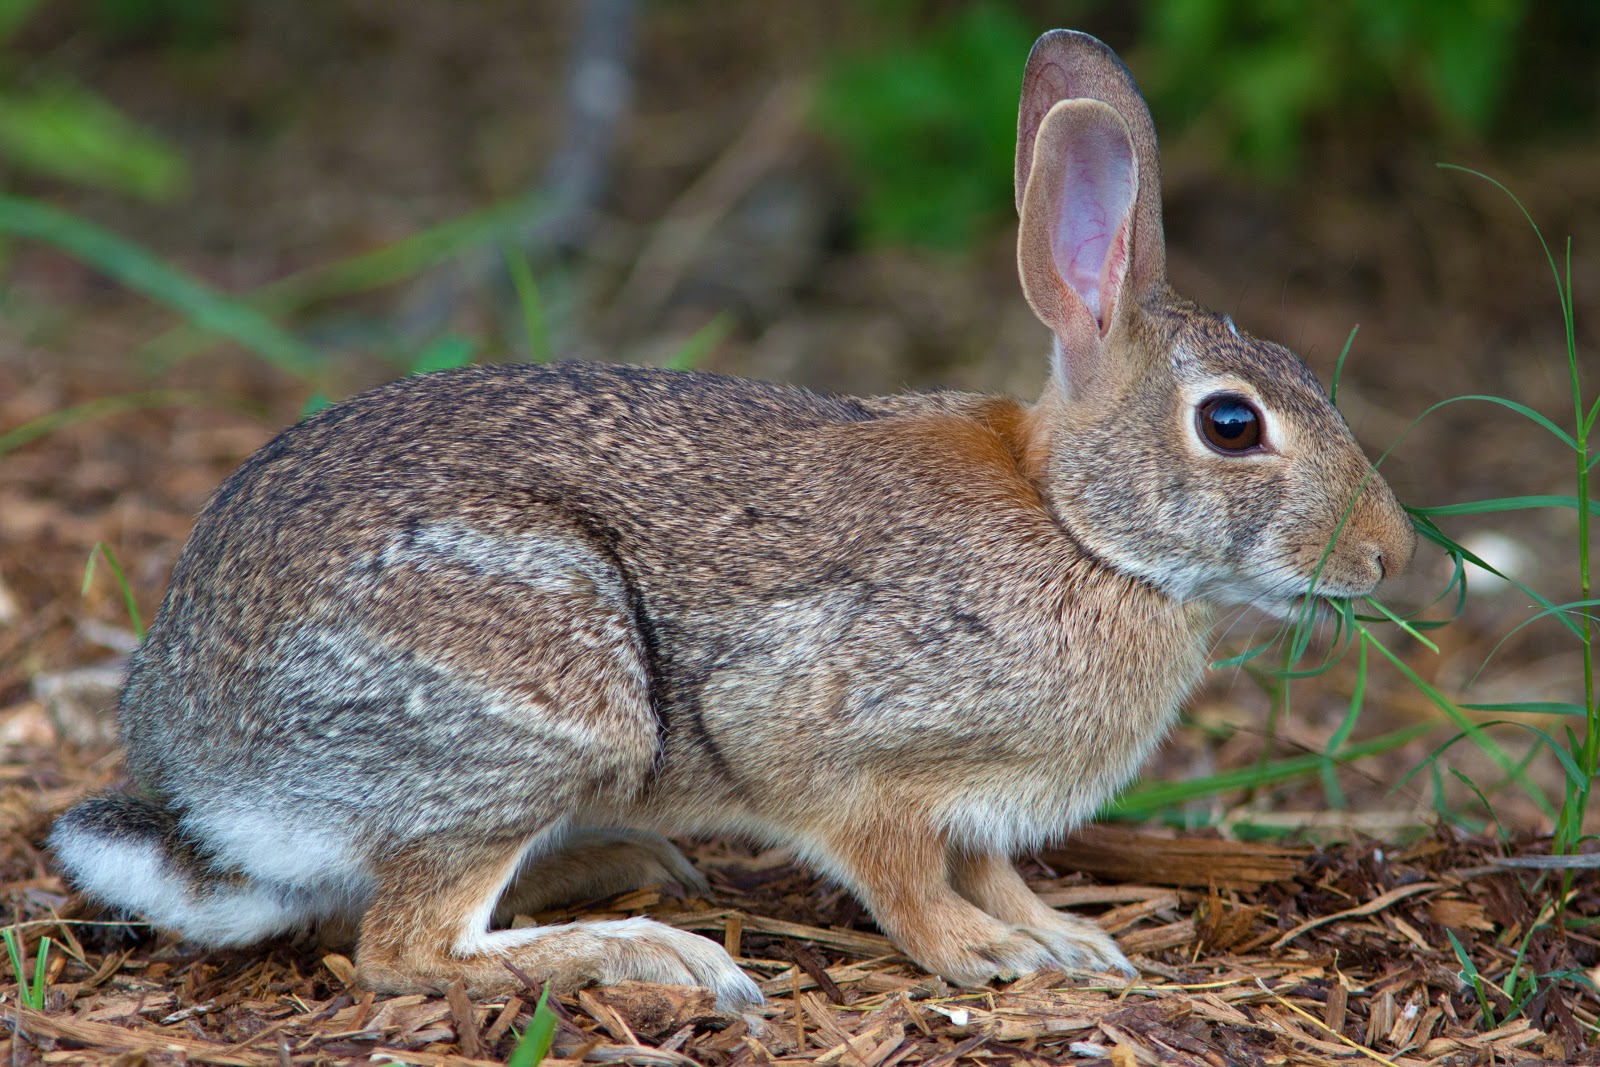 Find a solution to your rabbit control problem.